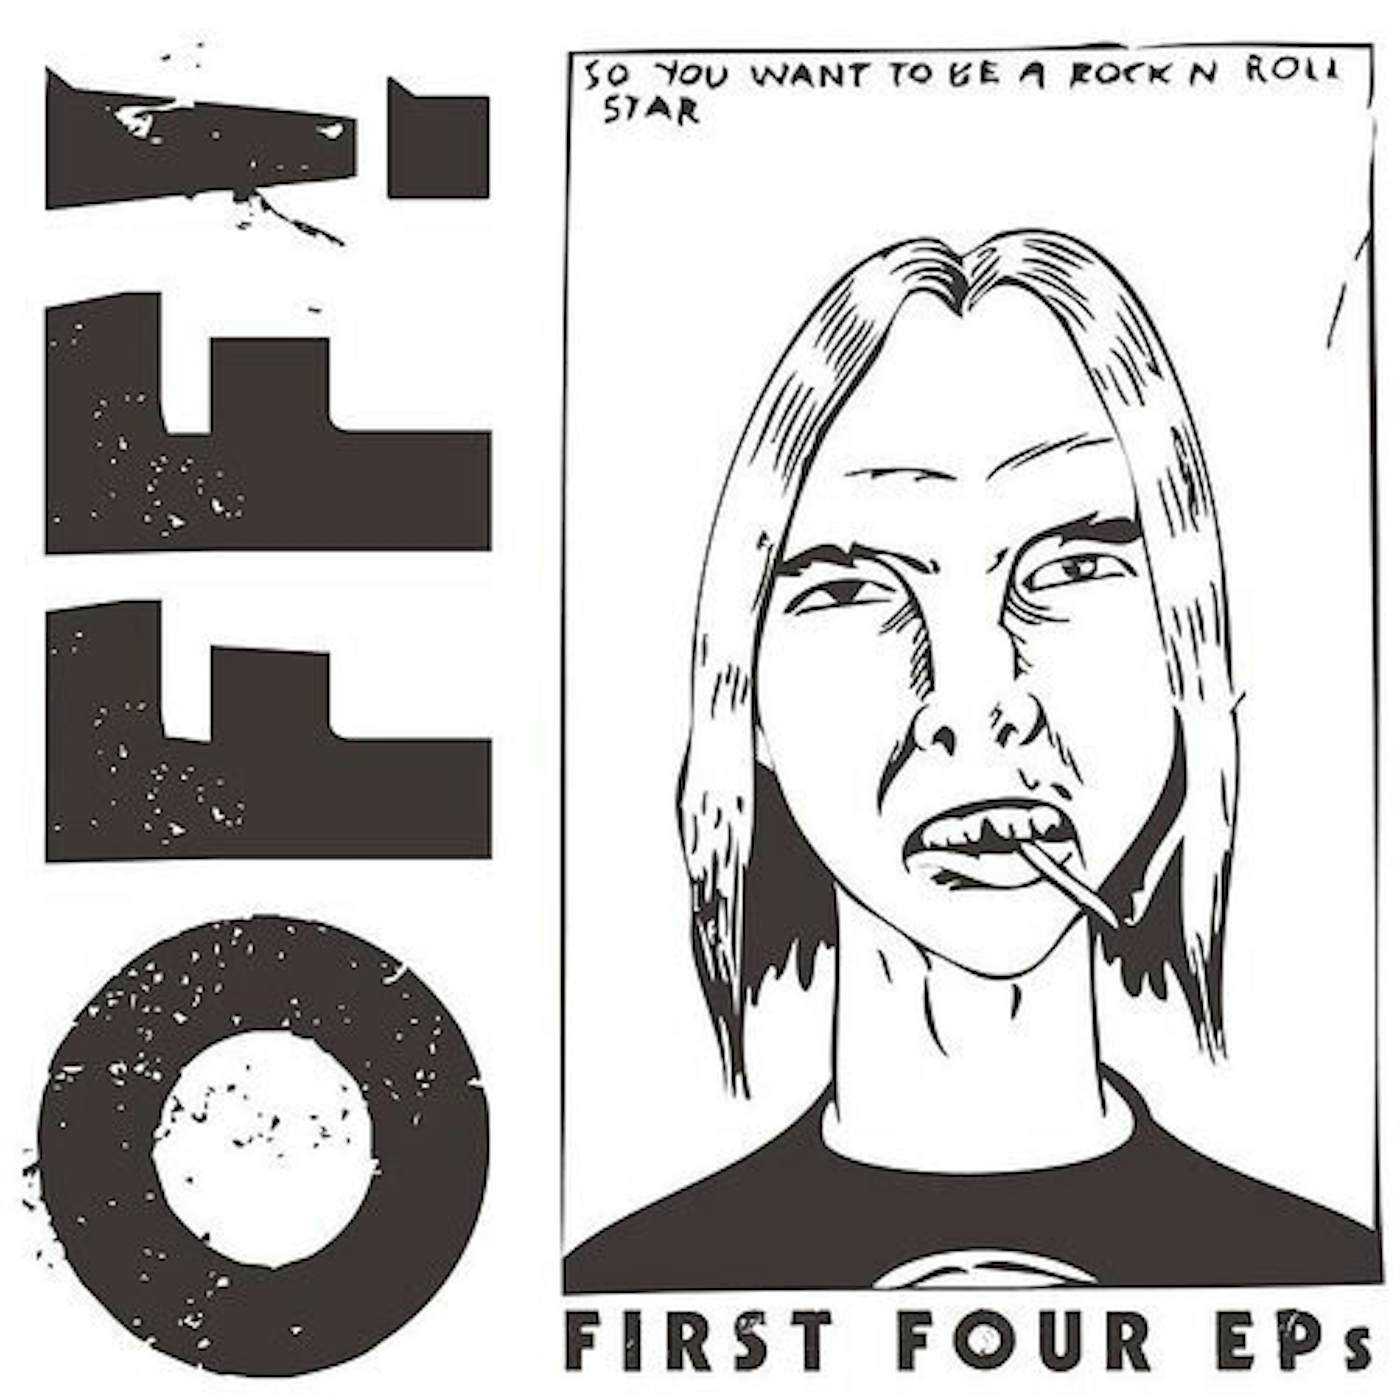 OFF FIRST FOUR EPS Vinyl Record